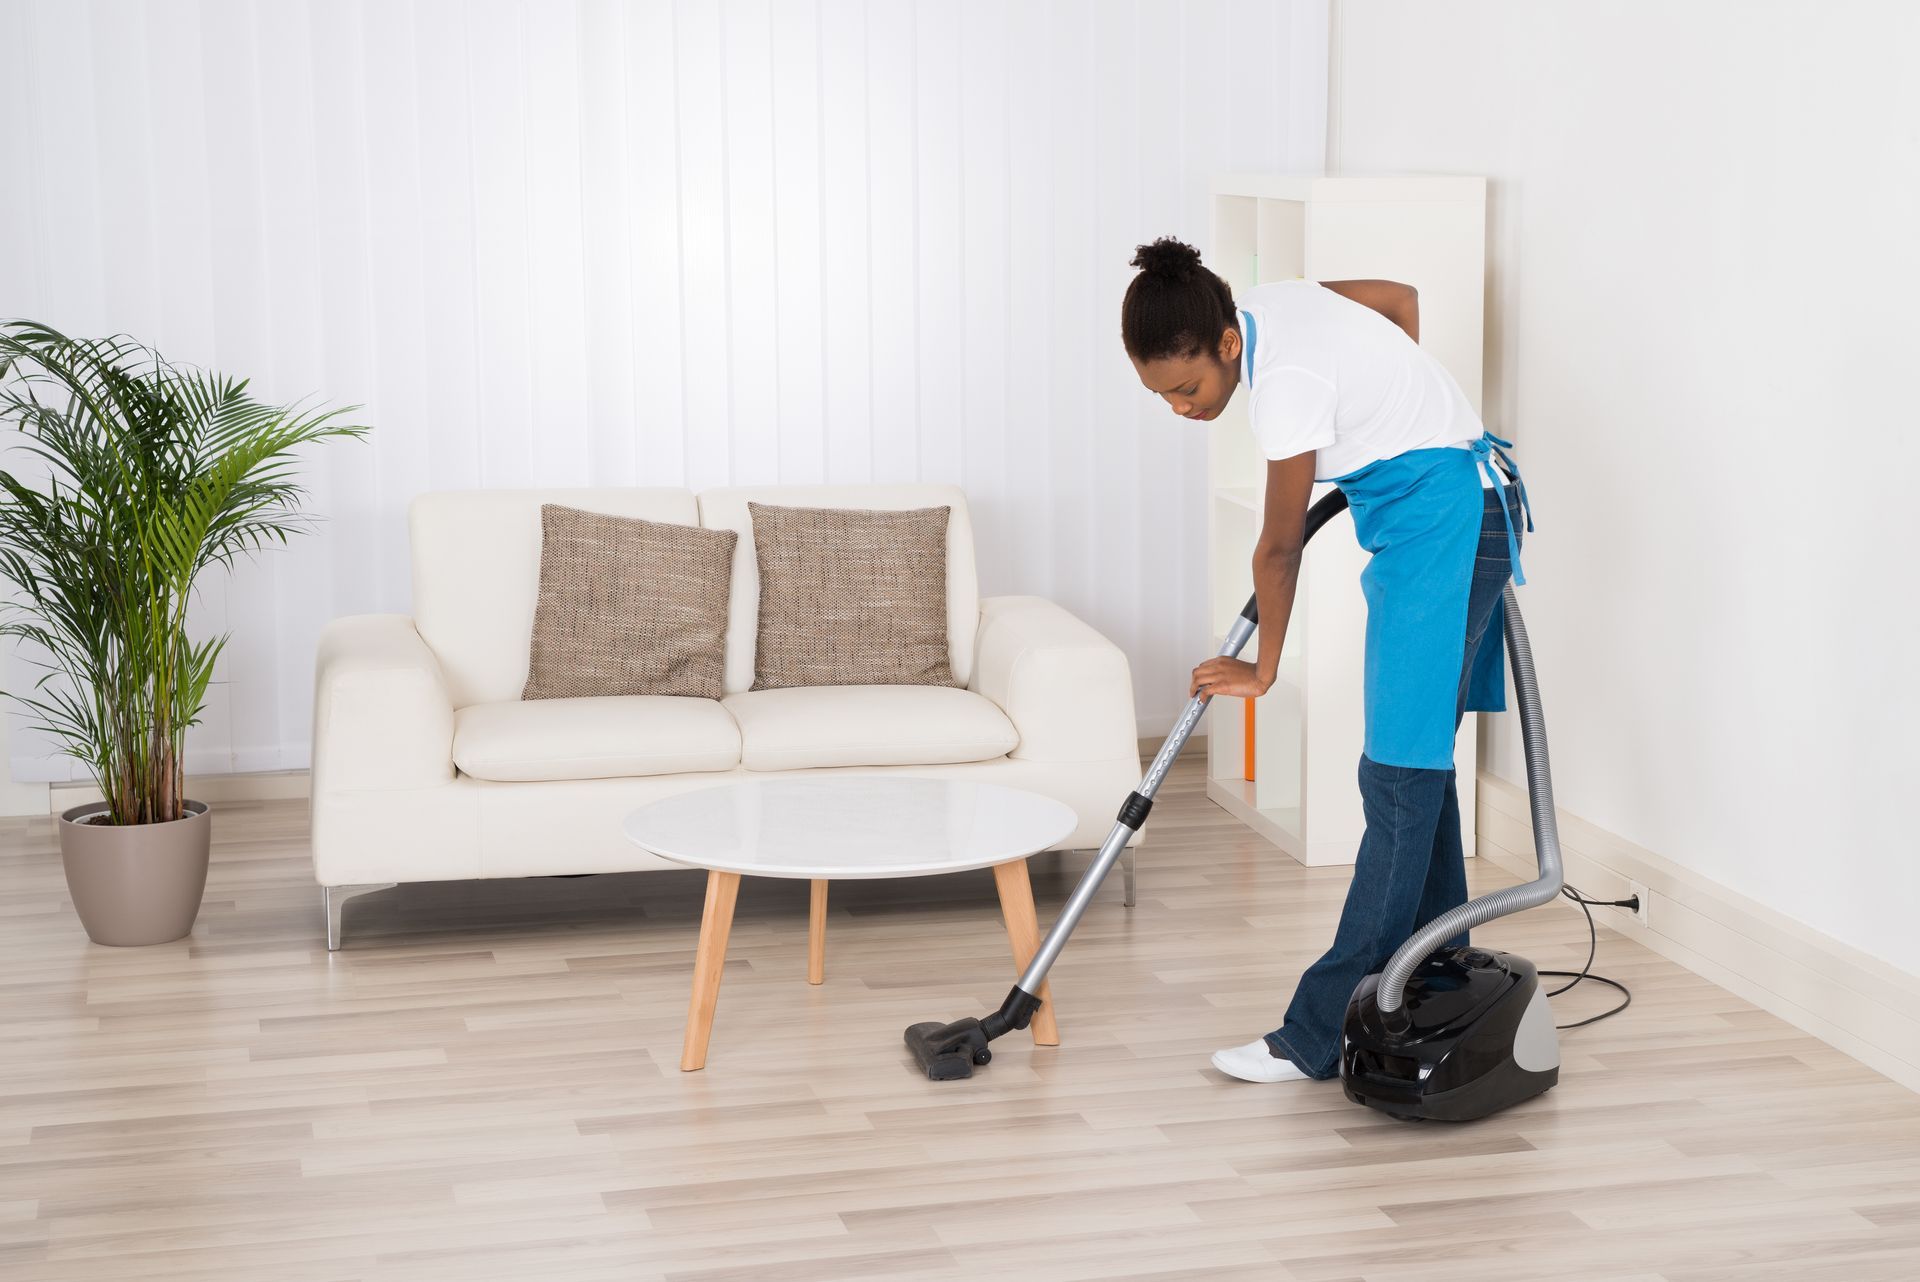 A woman is cleaning the floor with a vacuum cleaner in a living room.